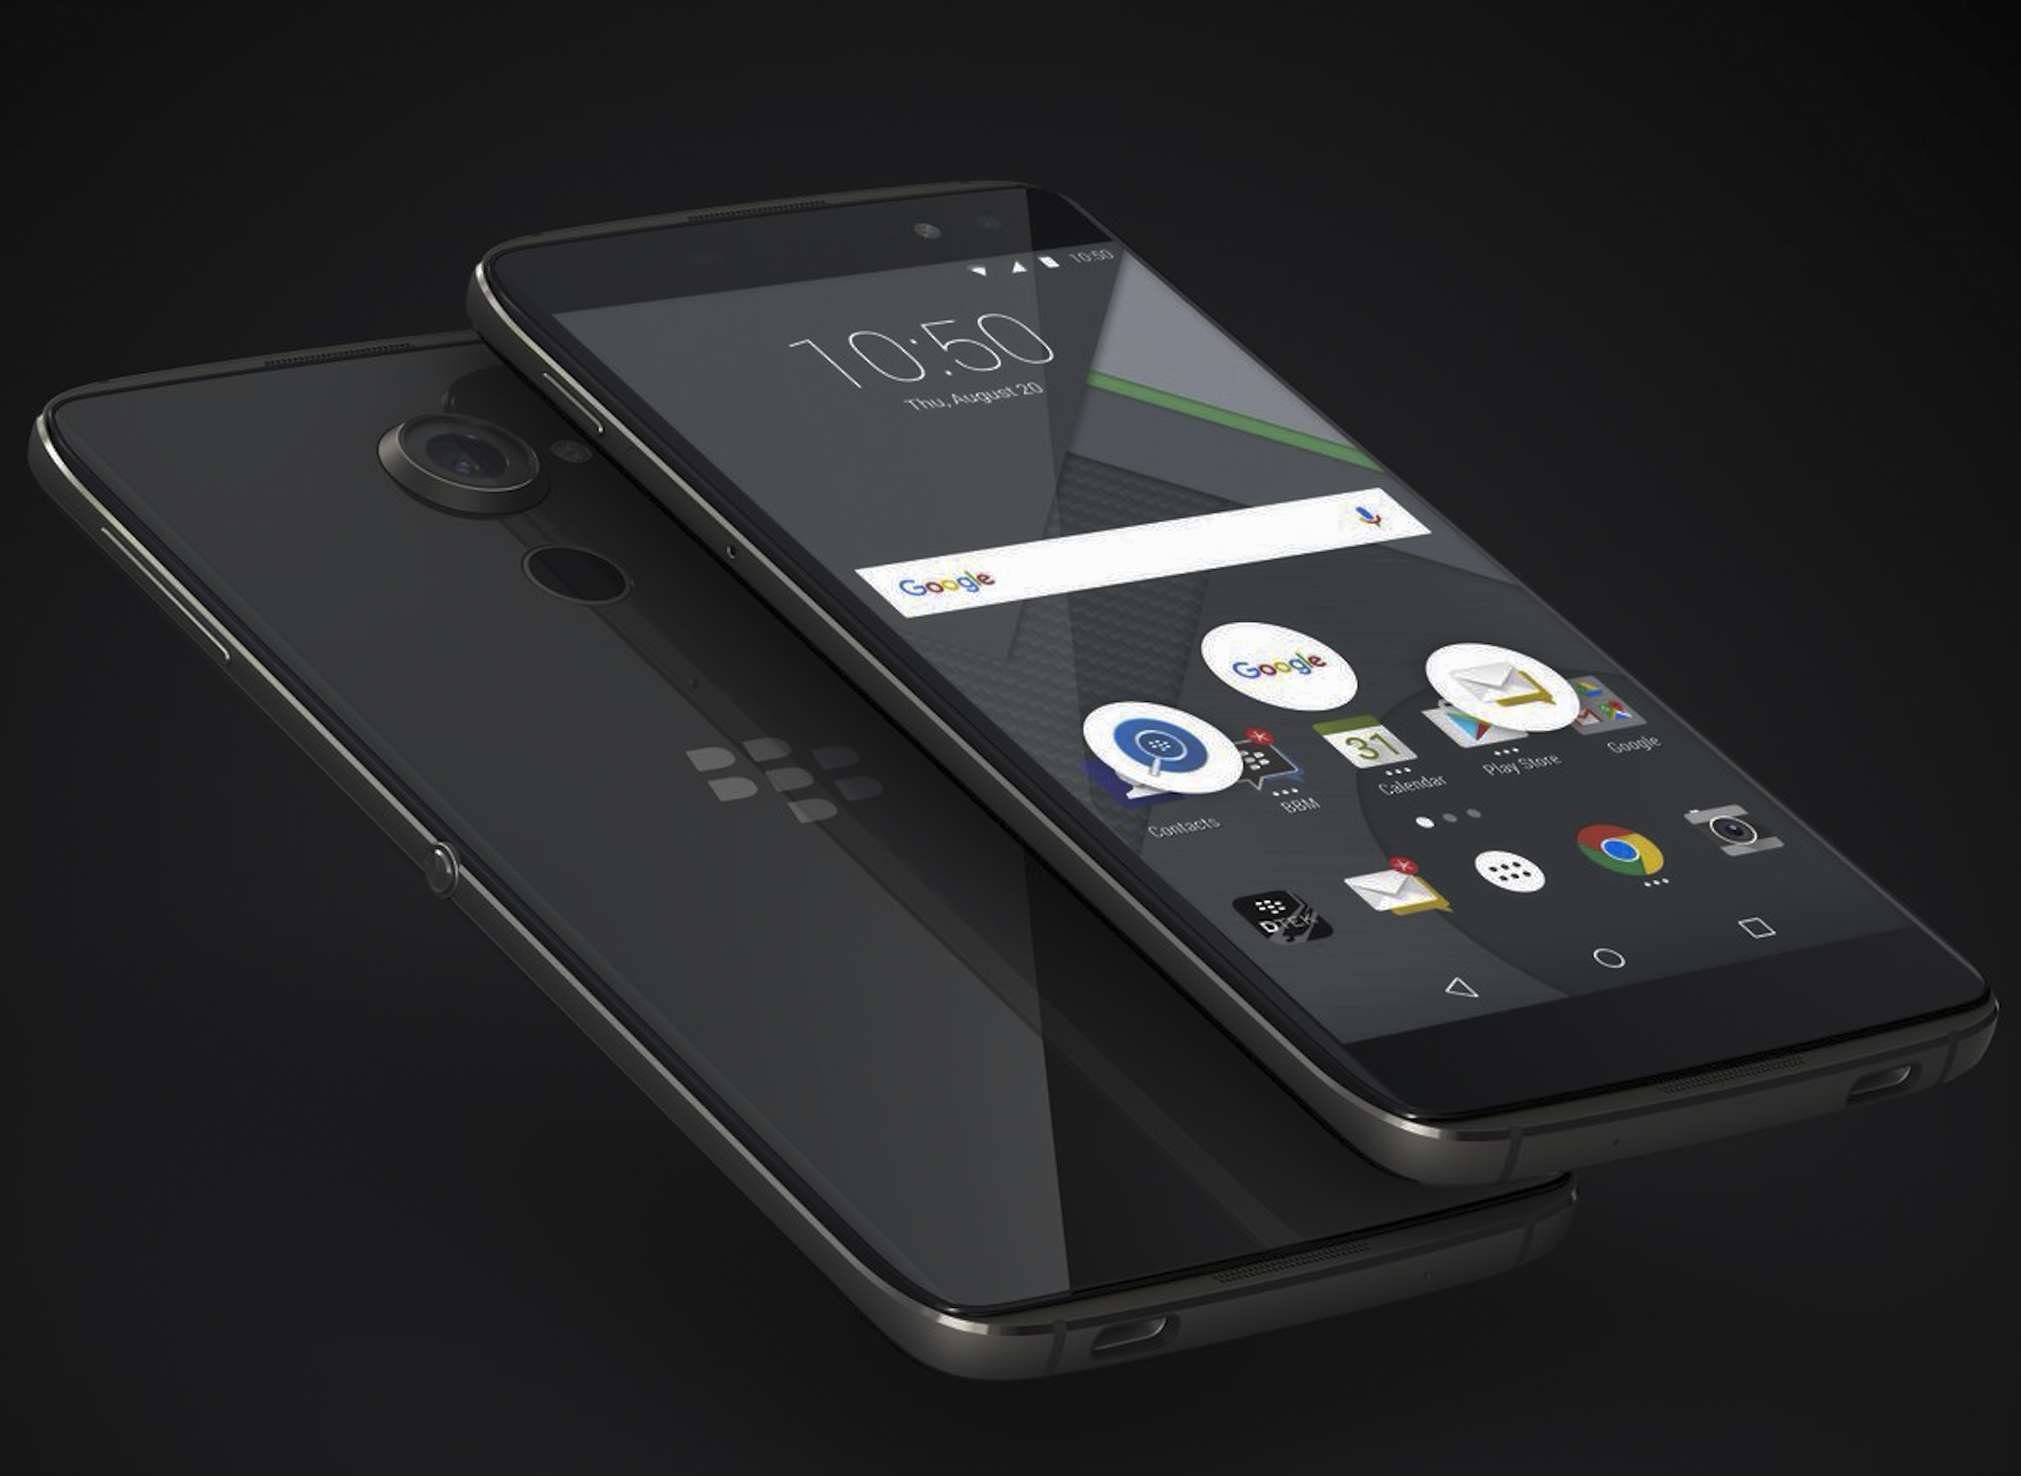 The BlackBerry DTEK60 is as secure as ever and its look and feel is great.